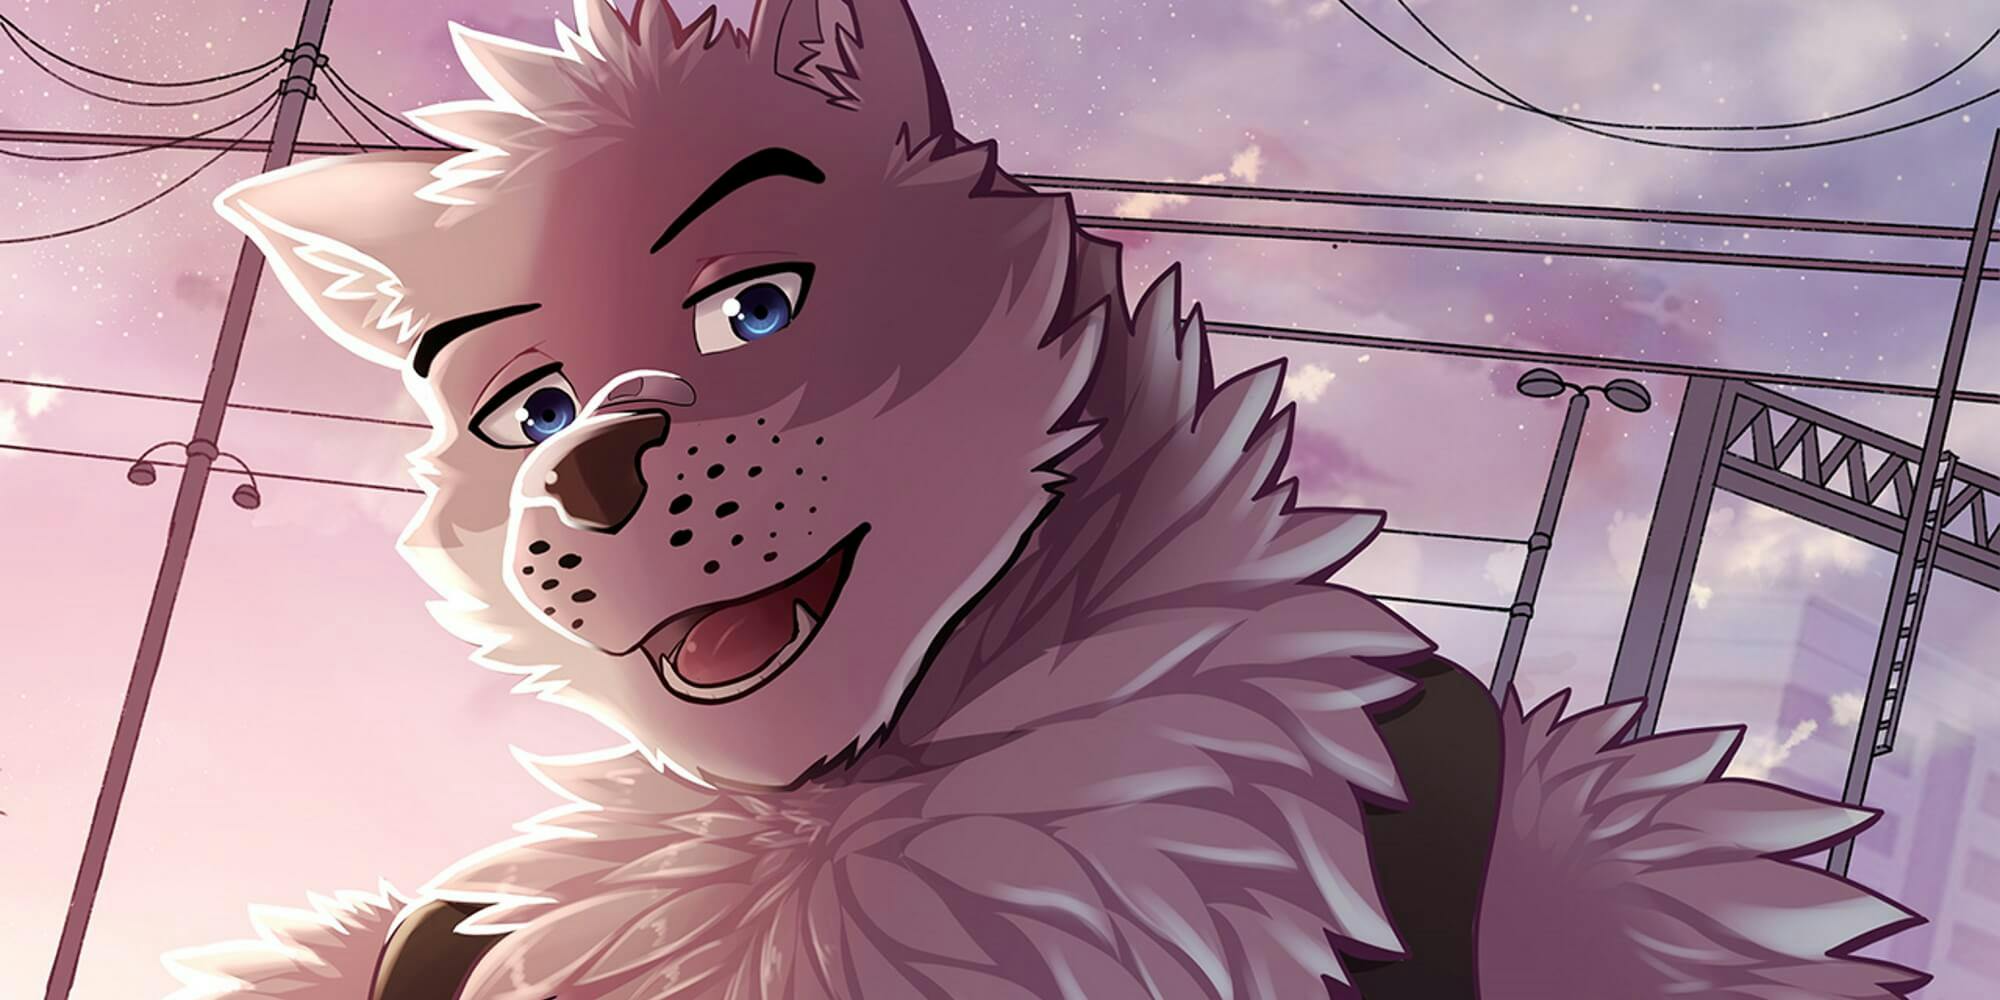 Gay Furry Porn Moving Animation - Gay Furry NSFW Visual Novel Sileo: Tales of a New Dawn Explores Yiffing